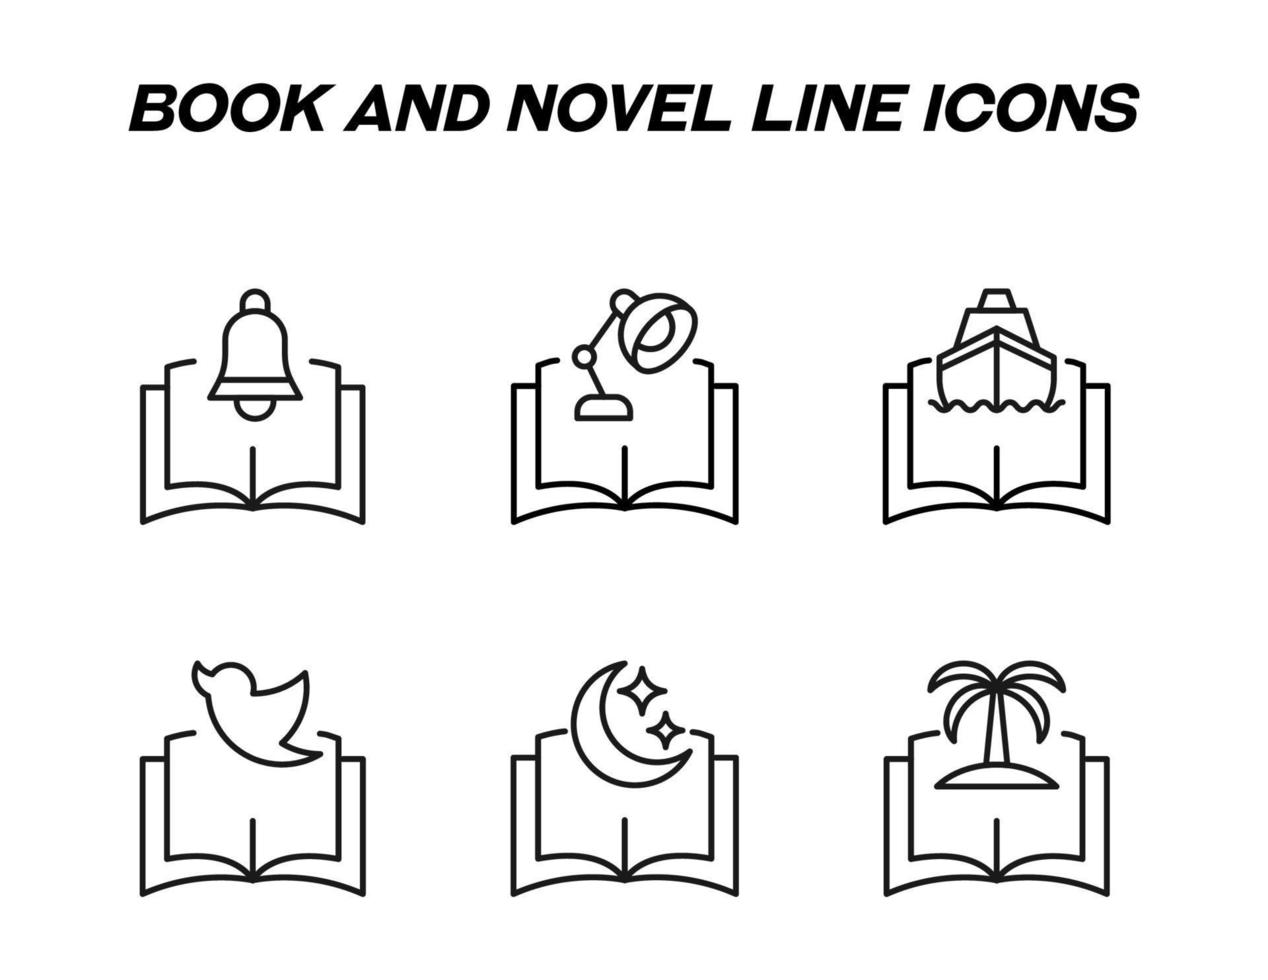 Book, reading, education and novel concept. Vector signs in flat style. Set of line icons of ring, table lamp, ship, bird, star, Moon, palm over book